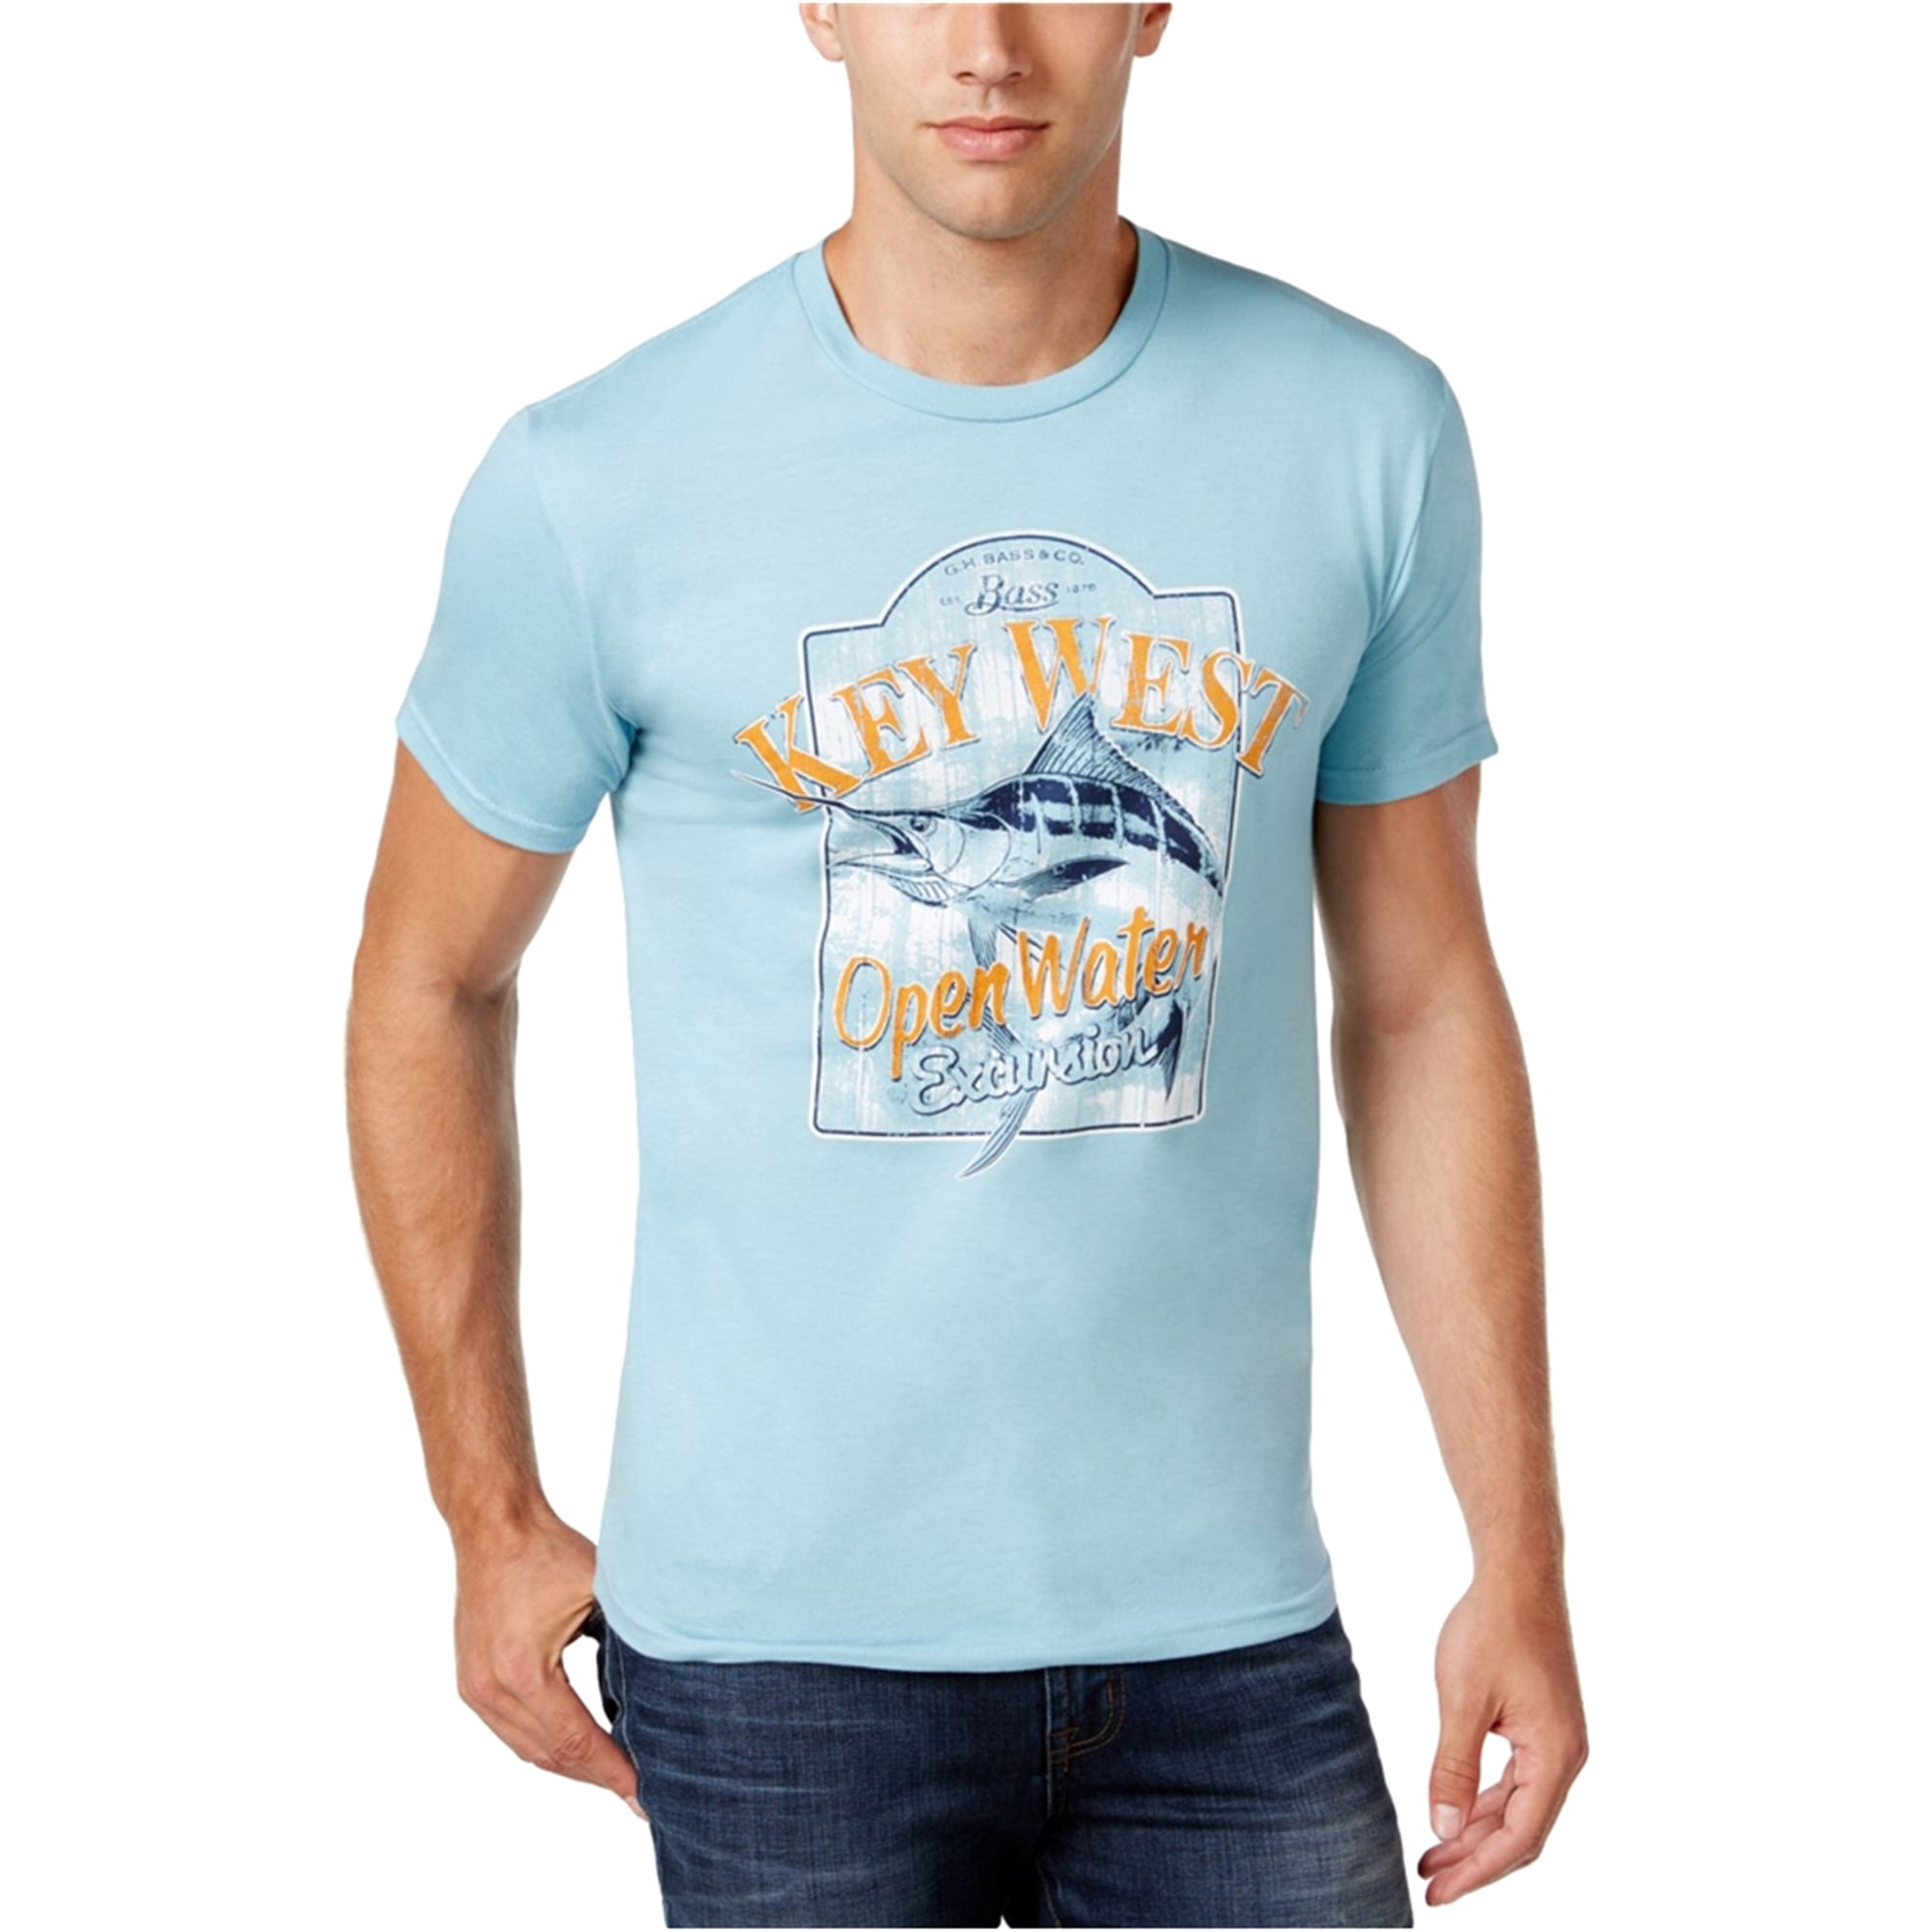 G.H. Bass & Co. Mens Key West Graphic T-Shirt, Blue, Small